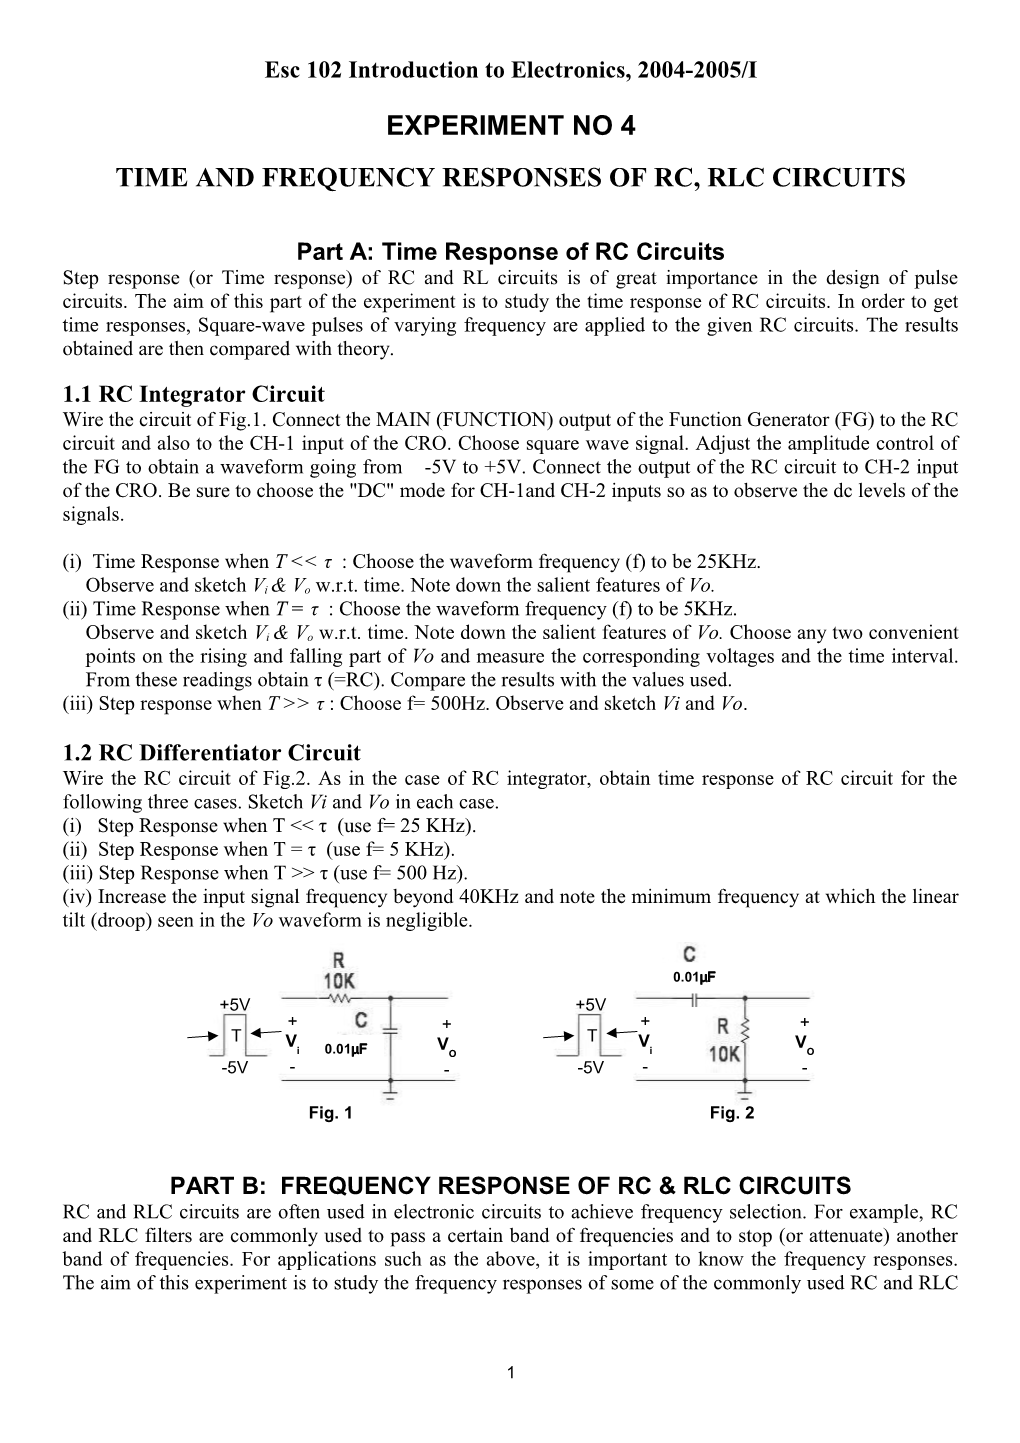 Time and Frequency Responses of Rc, Rlc Circuits